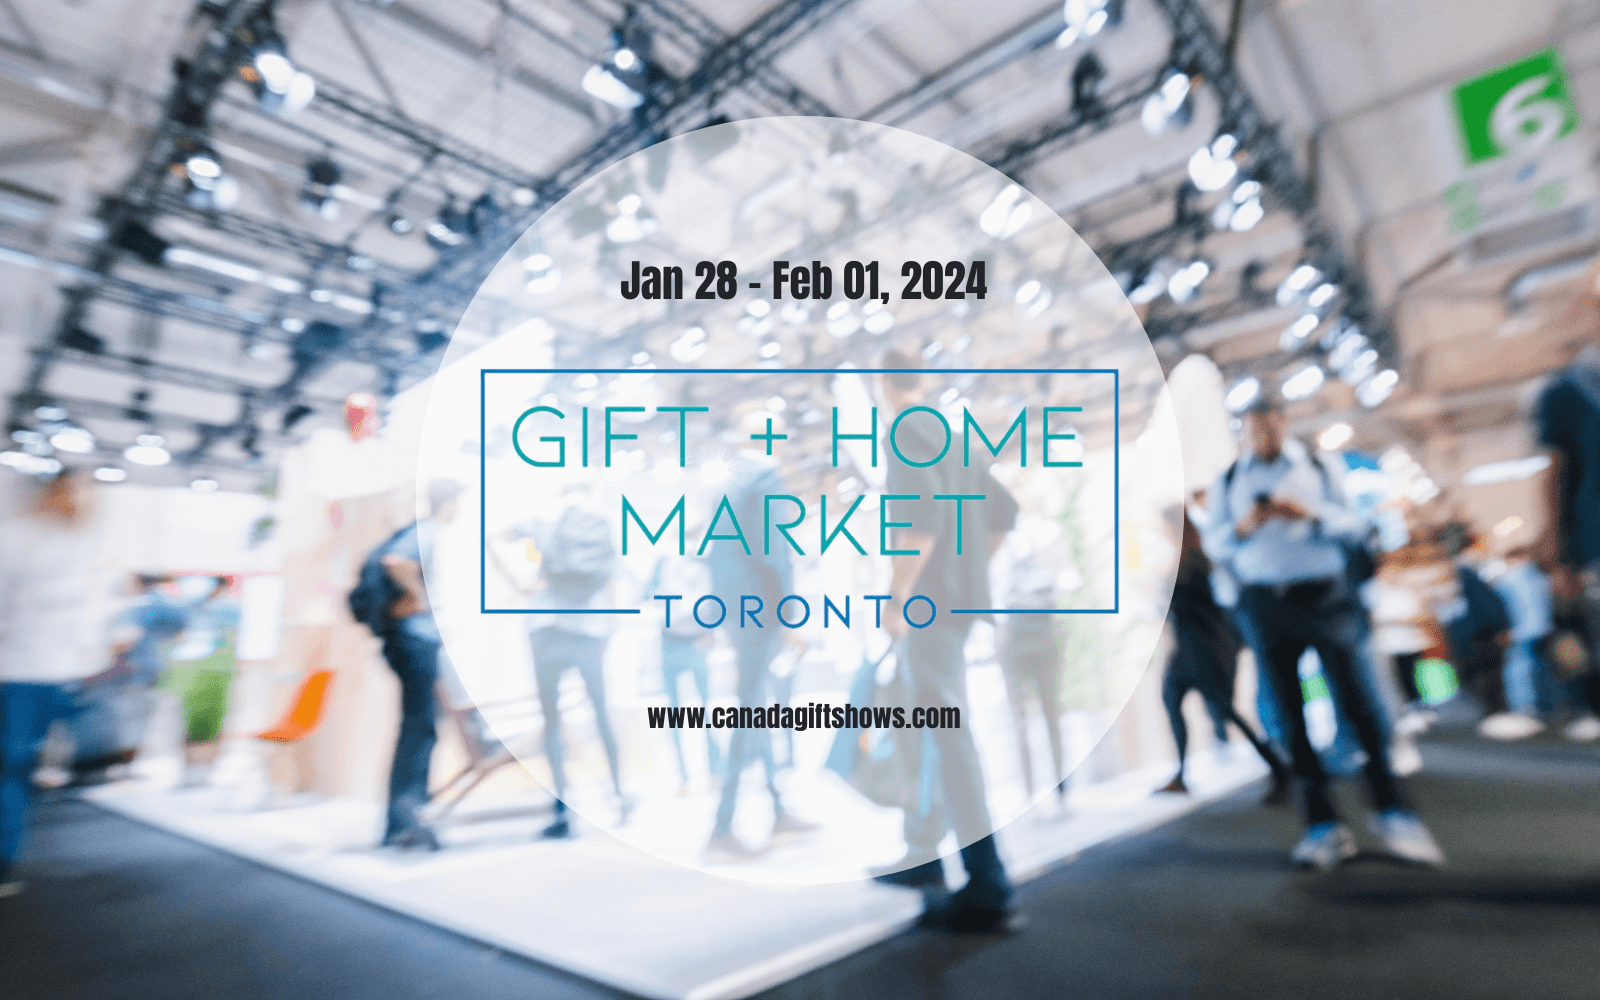 ATTENTION RETAILERS! VISIT US AT THE TORONTO GIFT + HOME MARKET